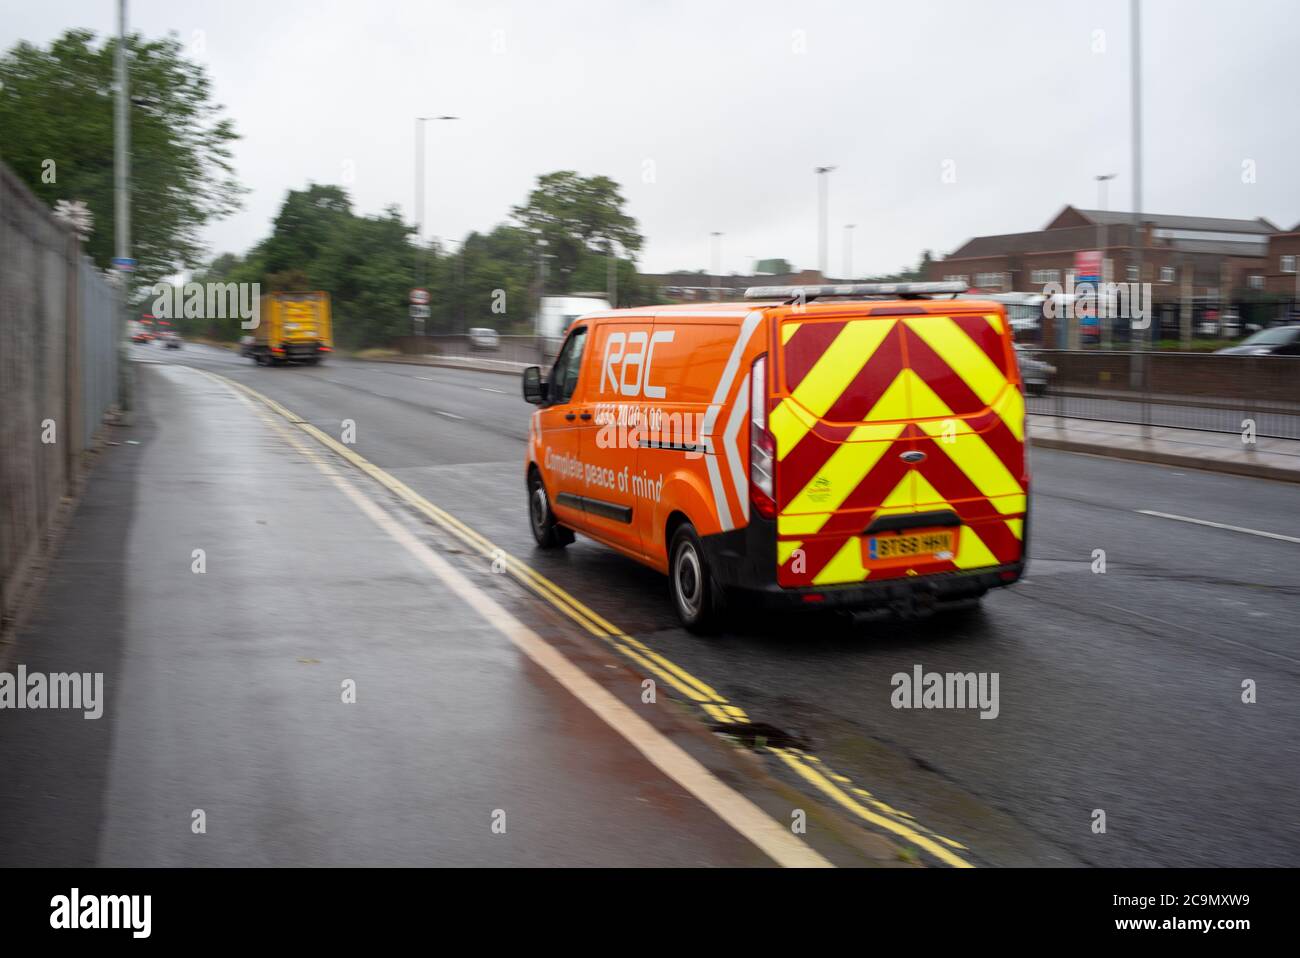 RAC van travelling down the road in Southampton Millbrook England. Stock Photo